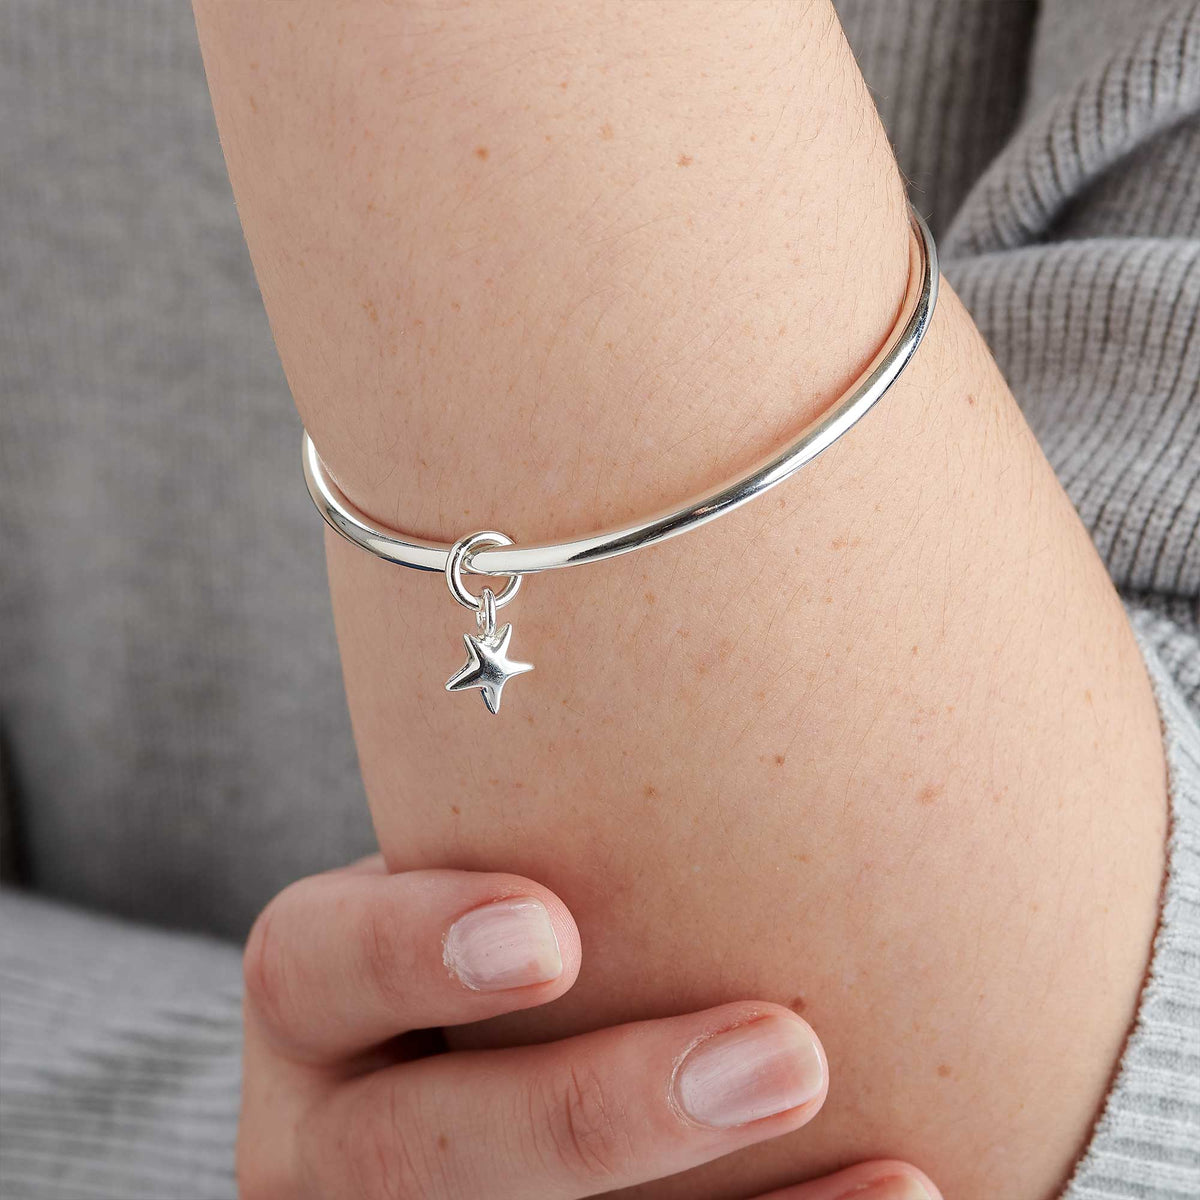 Luxurious Solid Silver Bangle with Star Charm